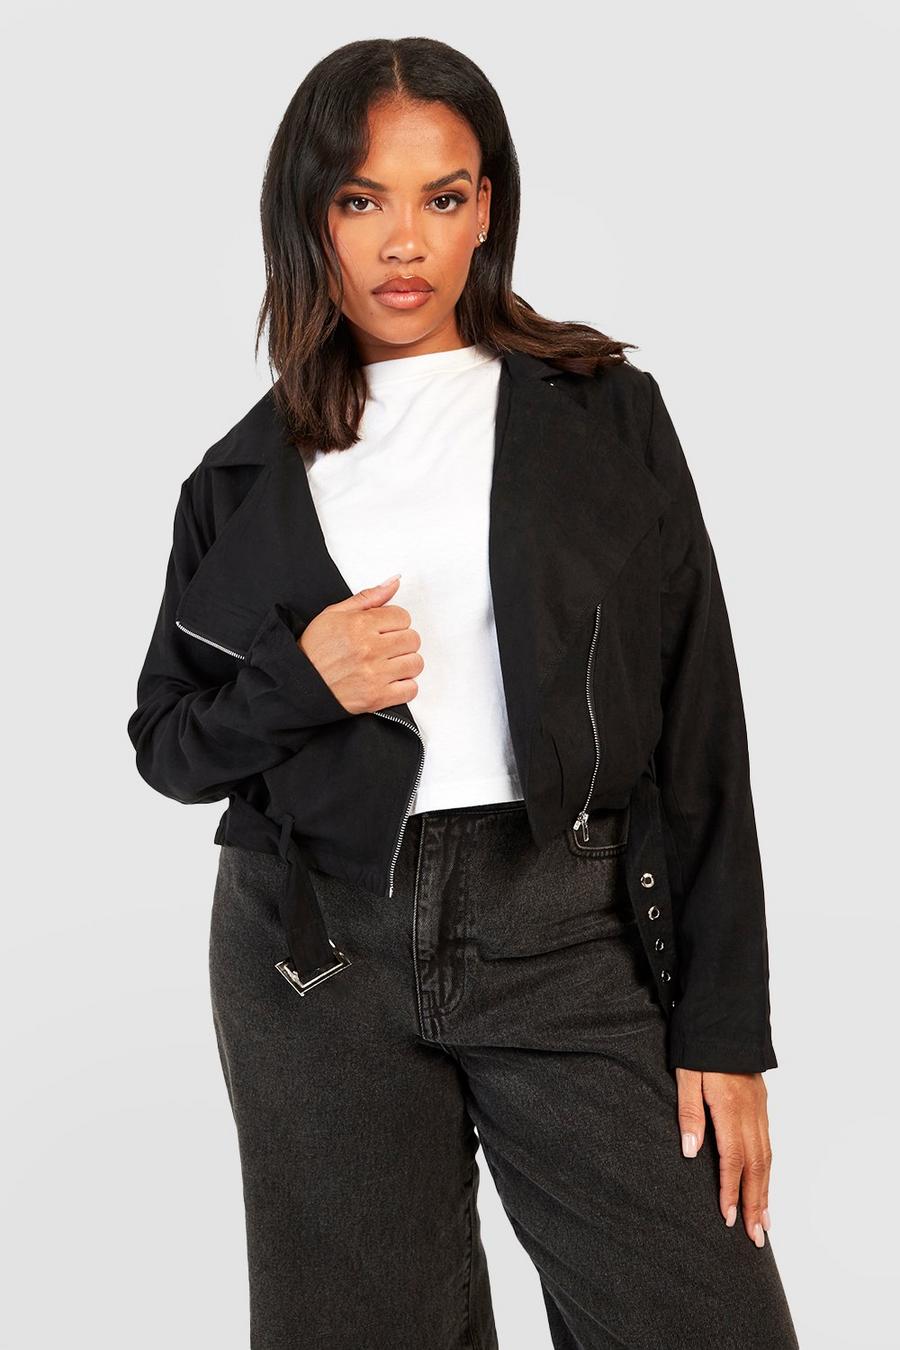 Plus Belted Faux Suede Cropped Moto Jacket | boohoo